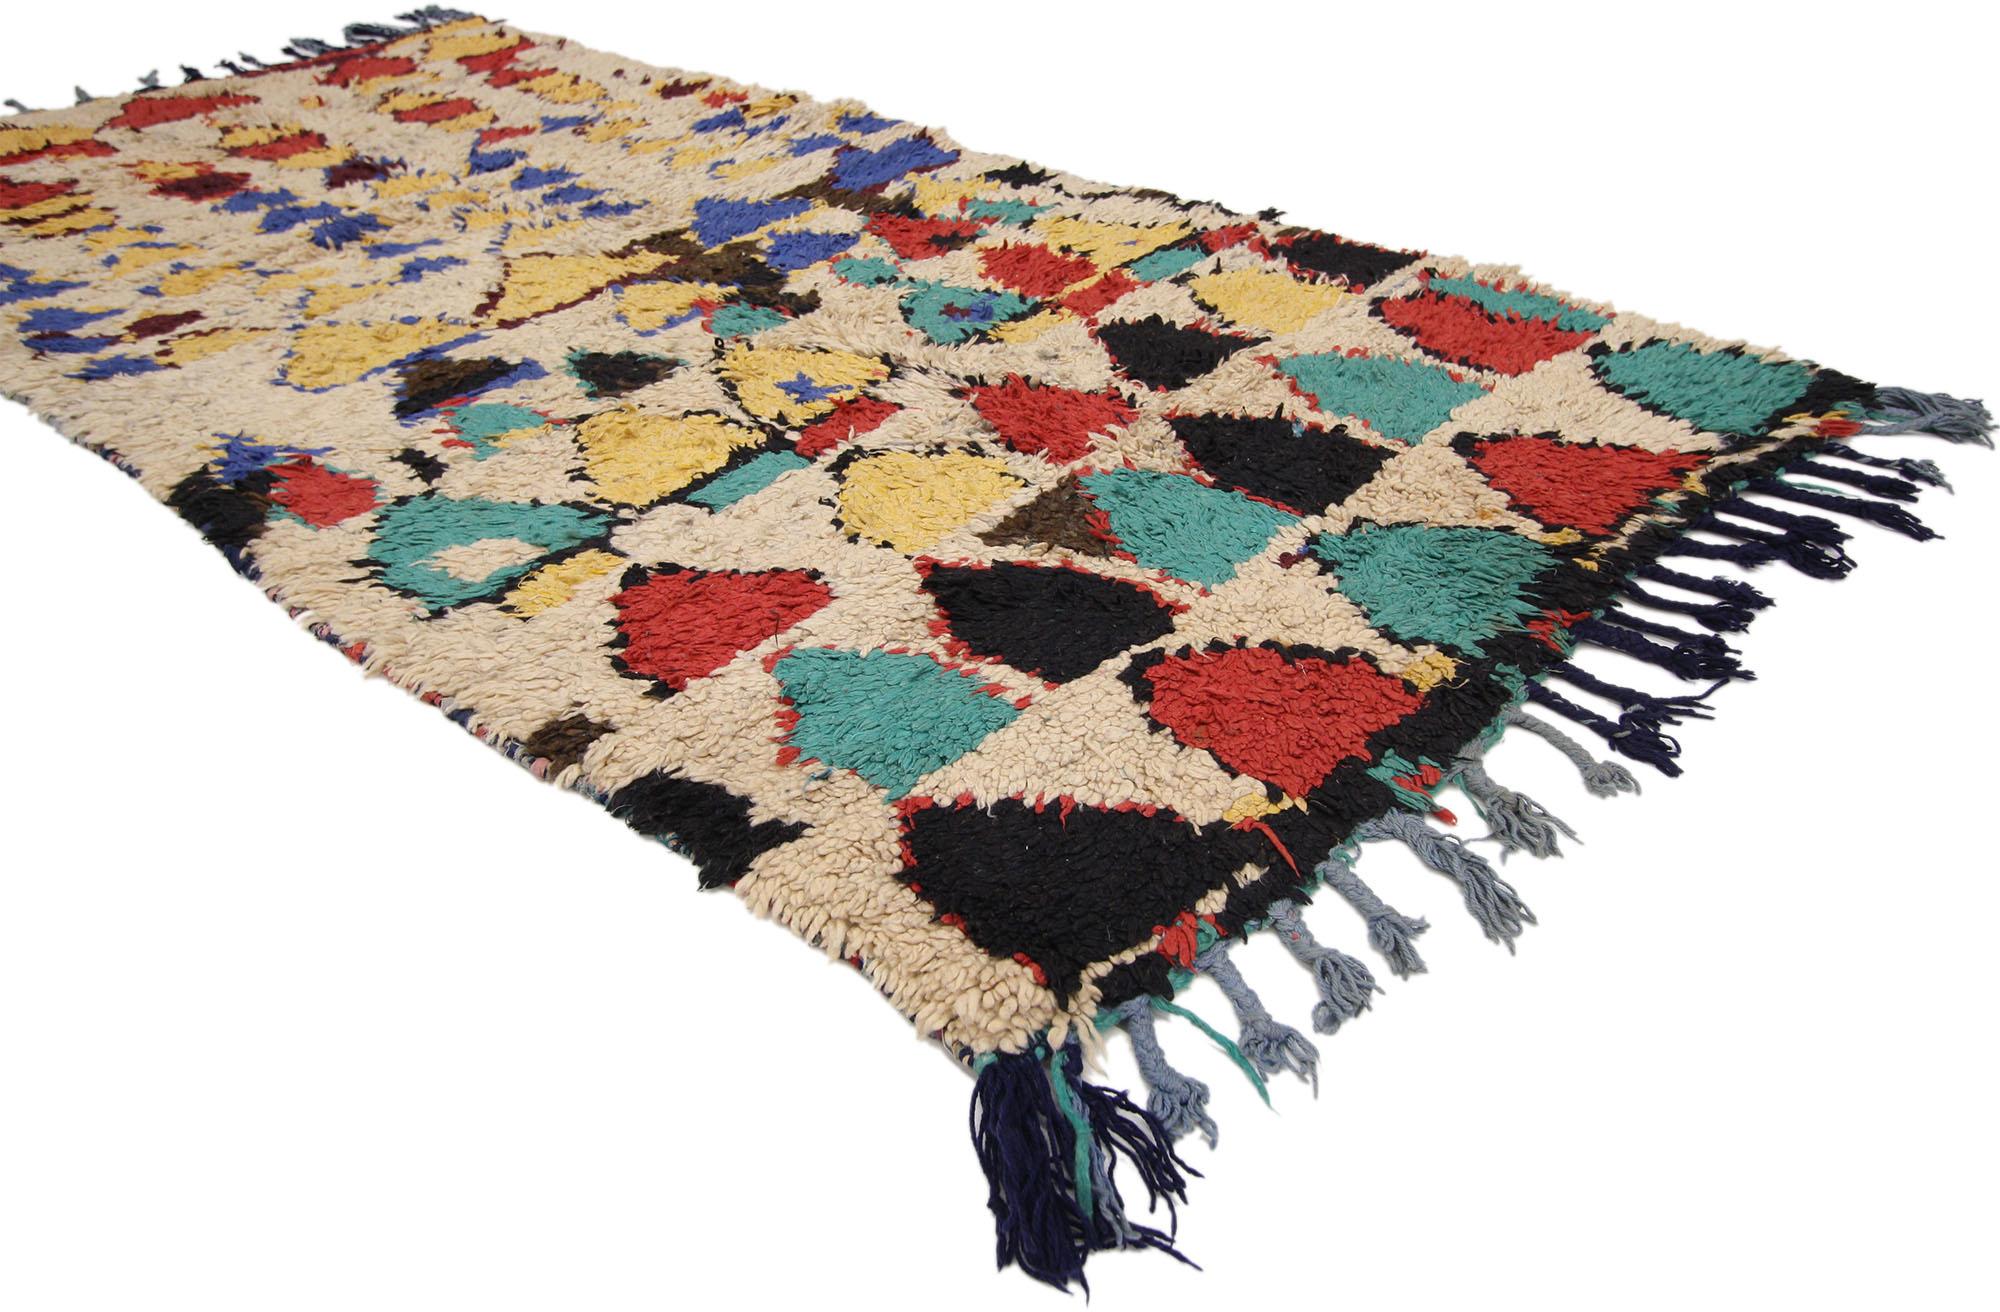 74778 Tribal Style Vintage Moroccan Azilal Runner, Berber Moroccan Shag Hallway Runner 03'06 x 07'02. Vivacious shades of the colors woven into this vintage Moroccan Azilal rug together to create a truly vibrant and life-giving feel. The